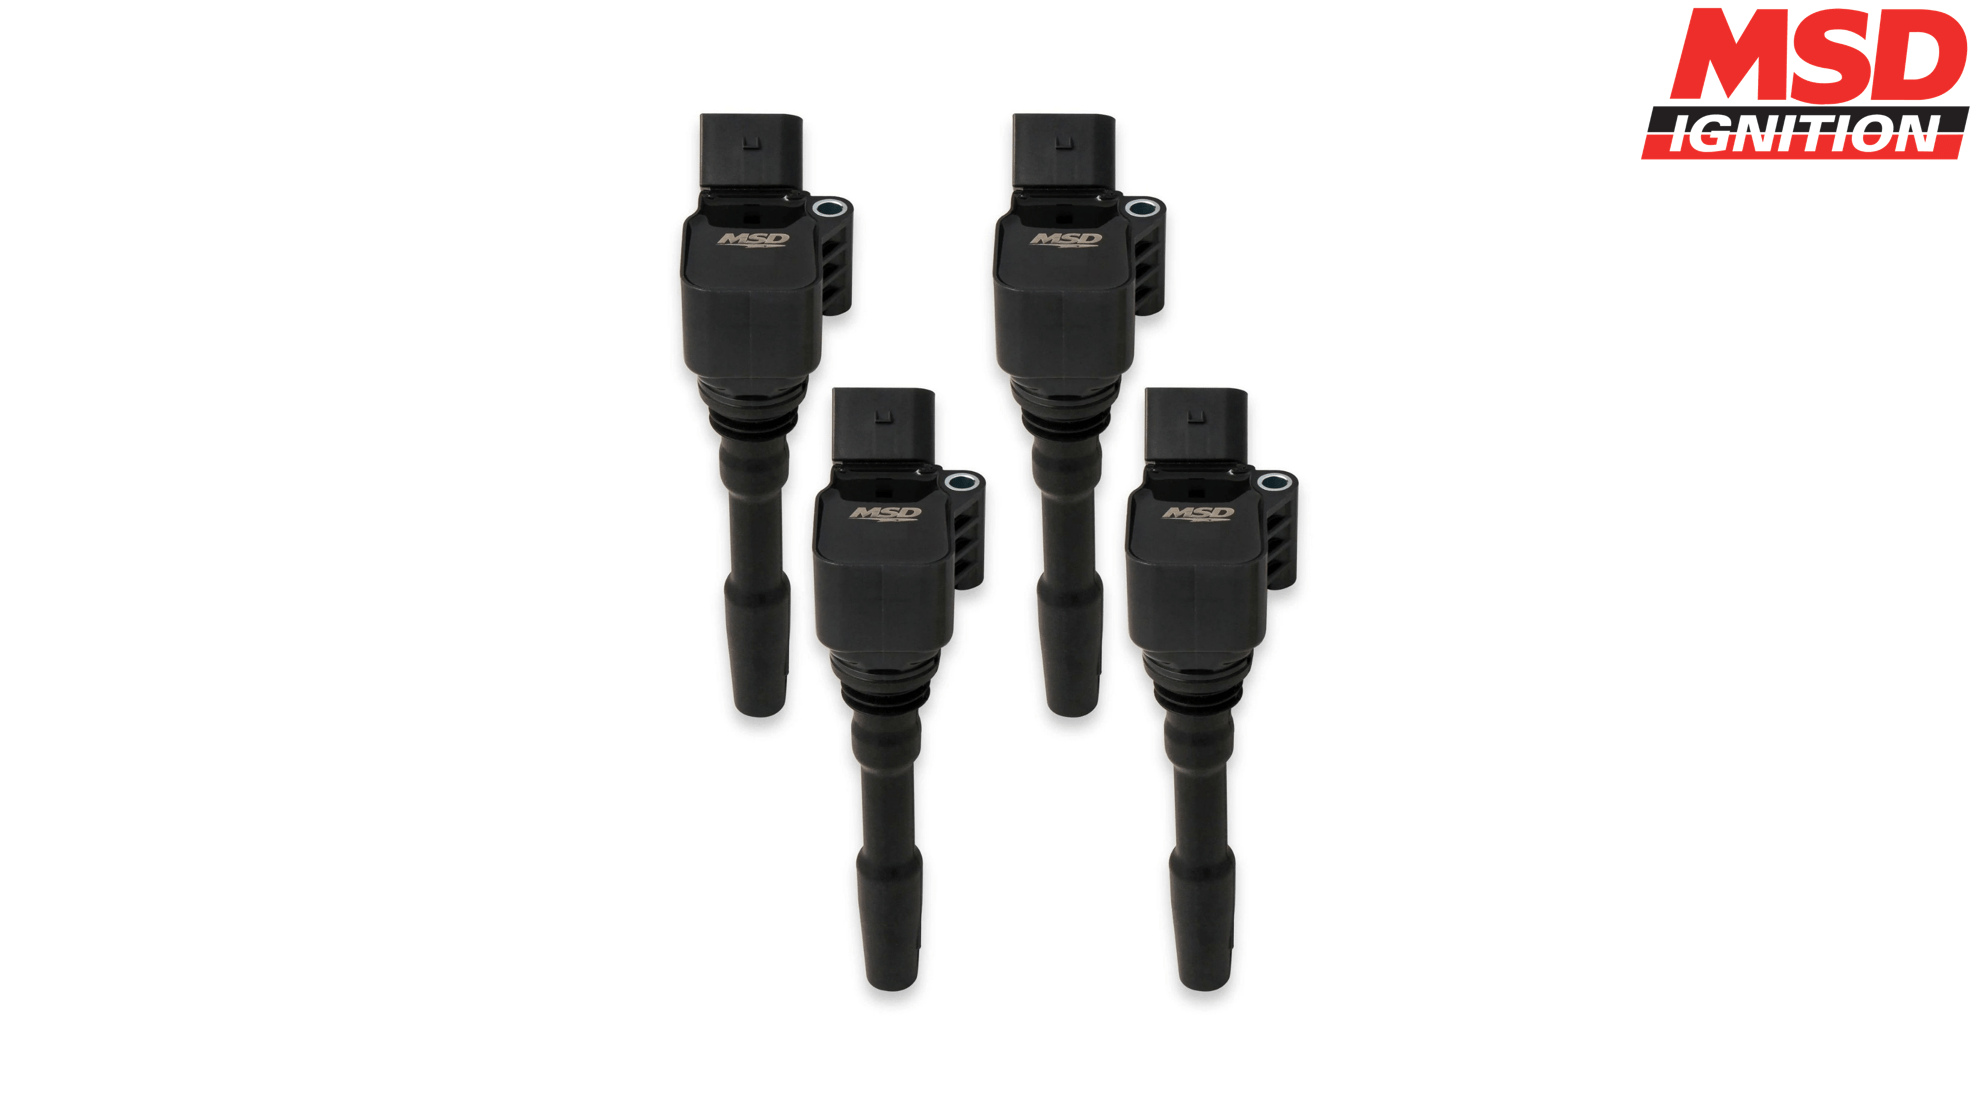 Buy MSD Blaster Series Black Pack Ignition Coil At The Best Price. Enjoy Hassle Free Shipping.